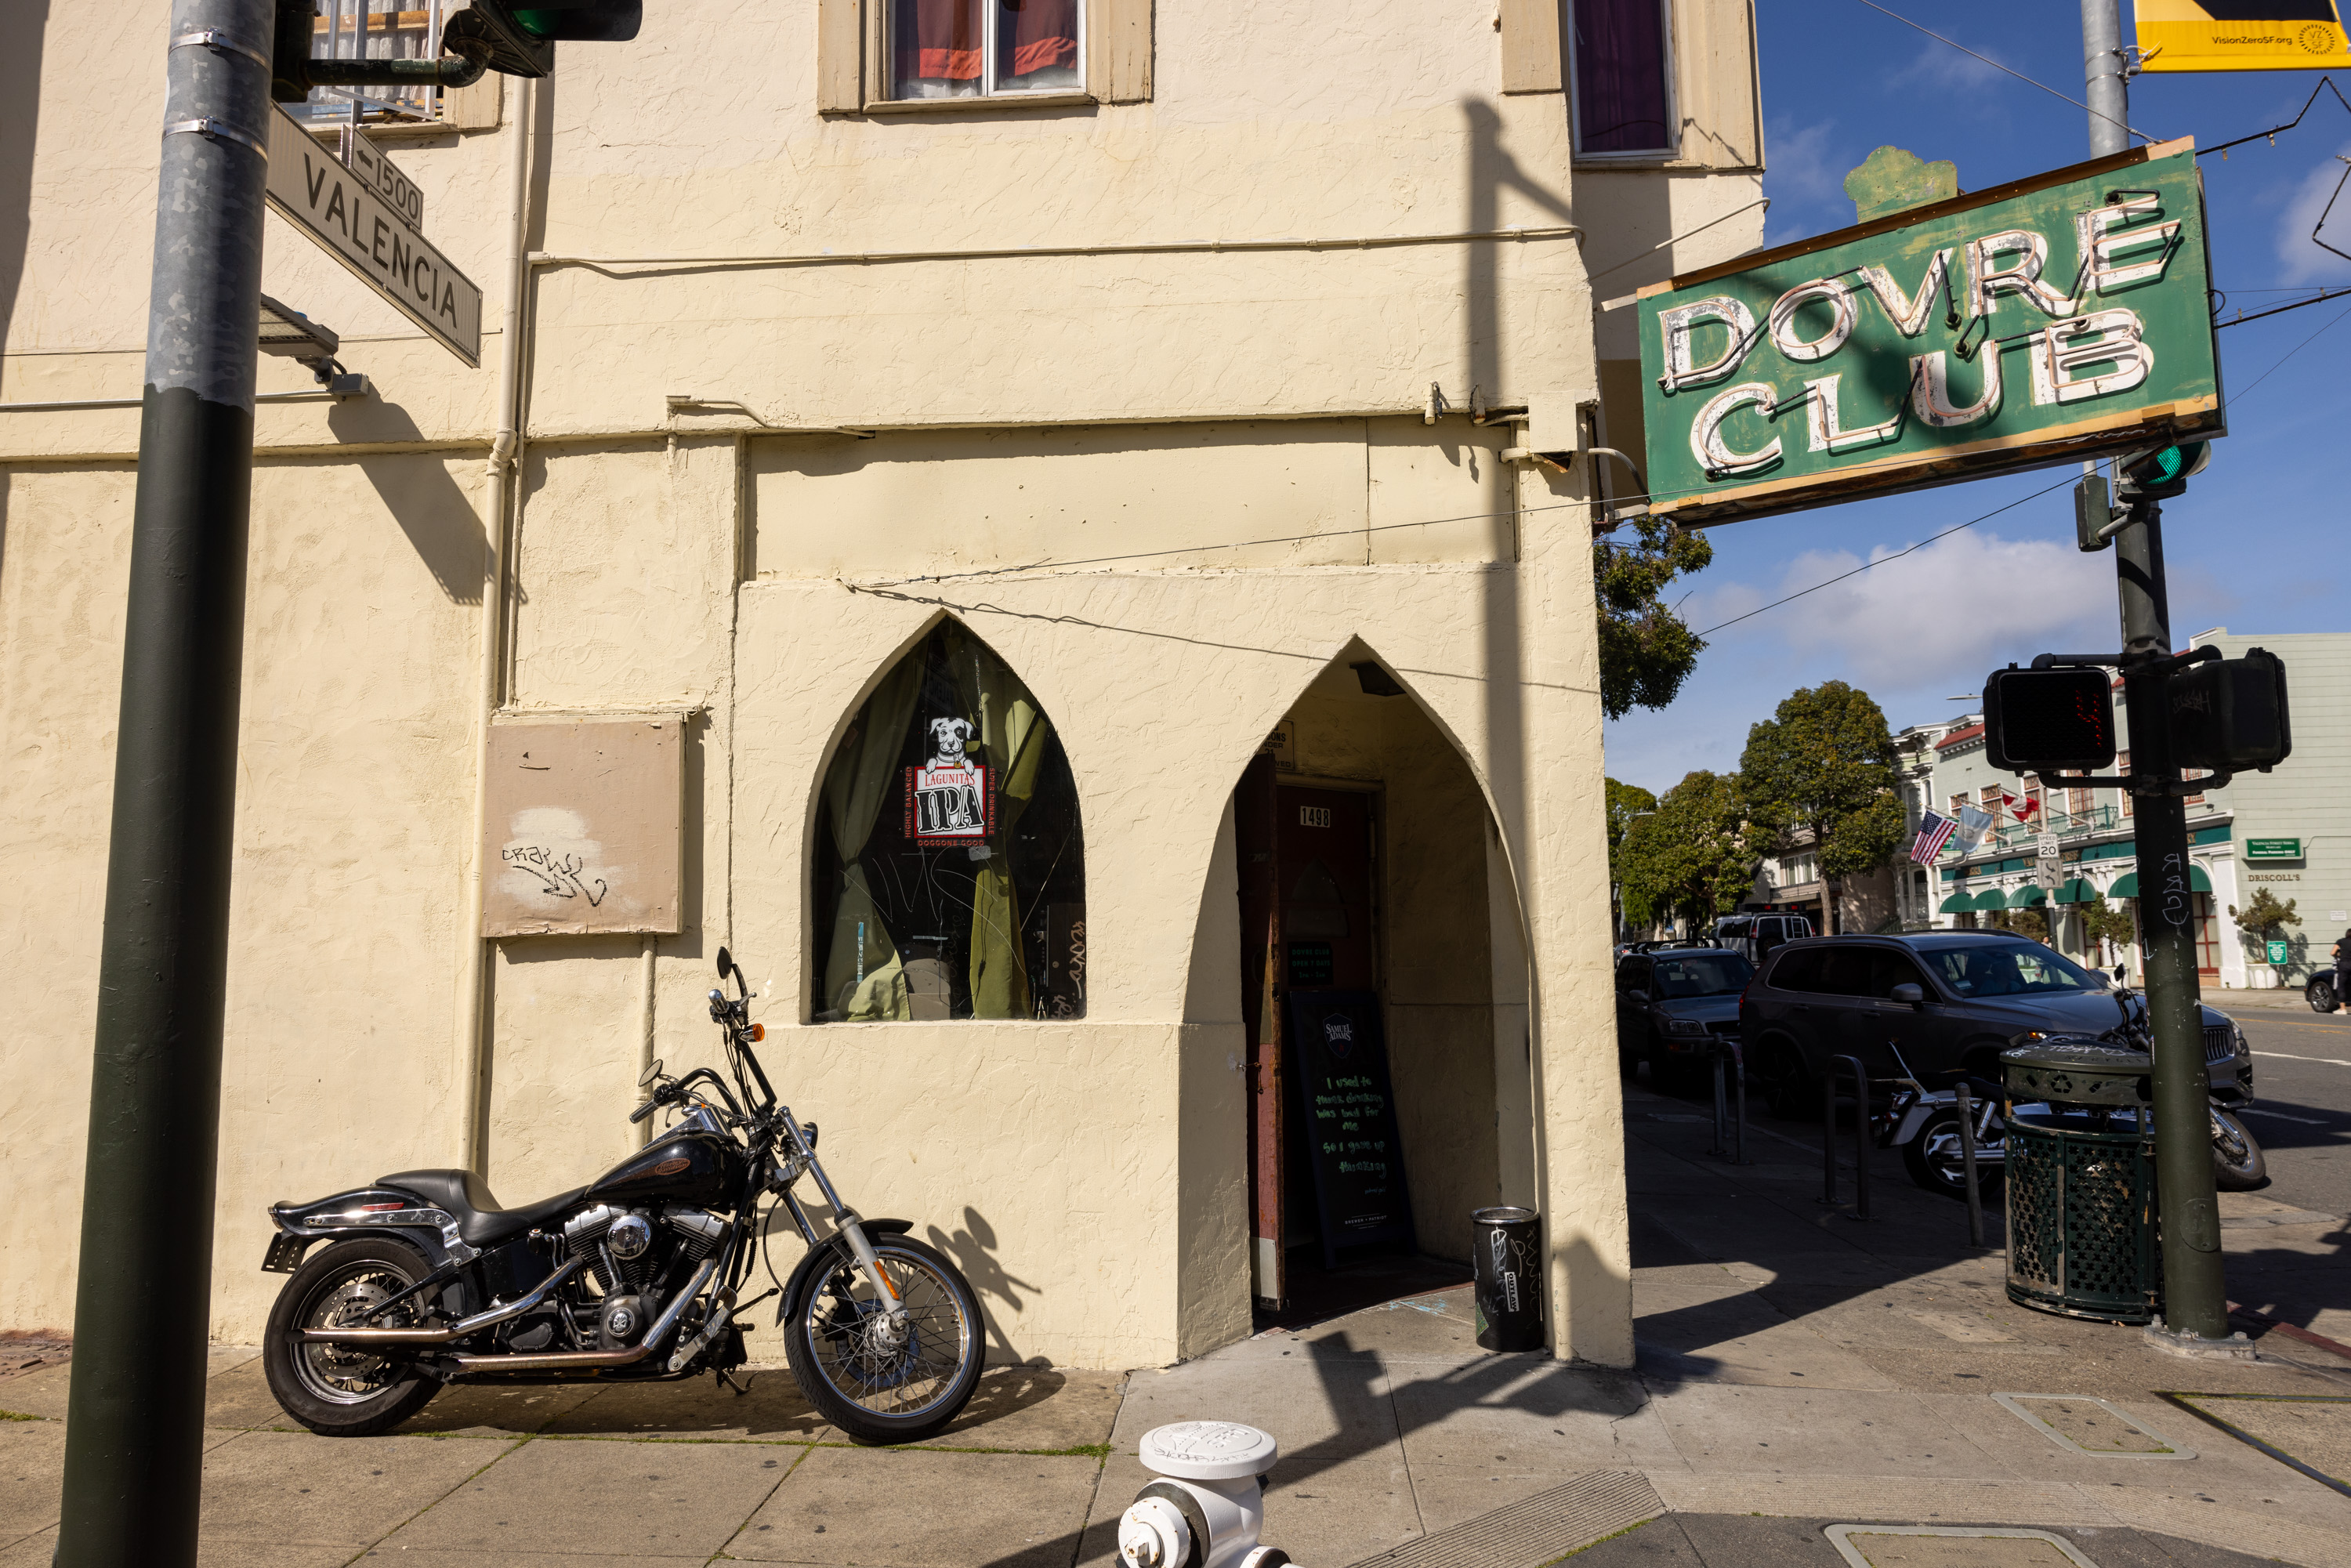 A motorcycle is parked by a corner building with a "Dovre Club" neon sign, near a street sign for Valencia.